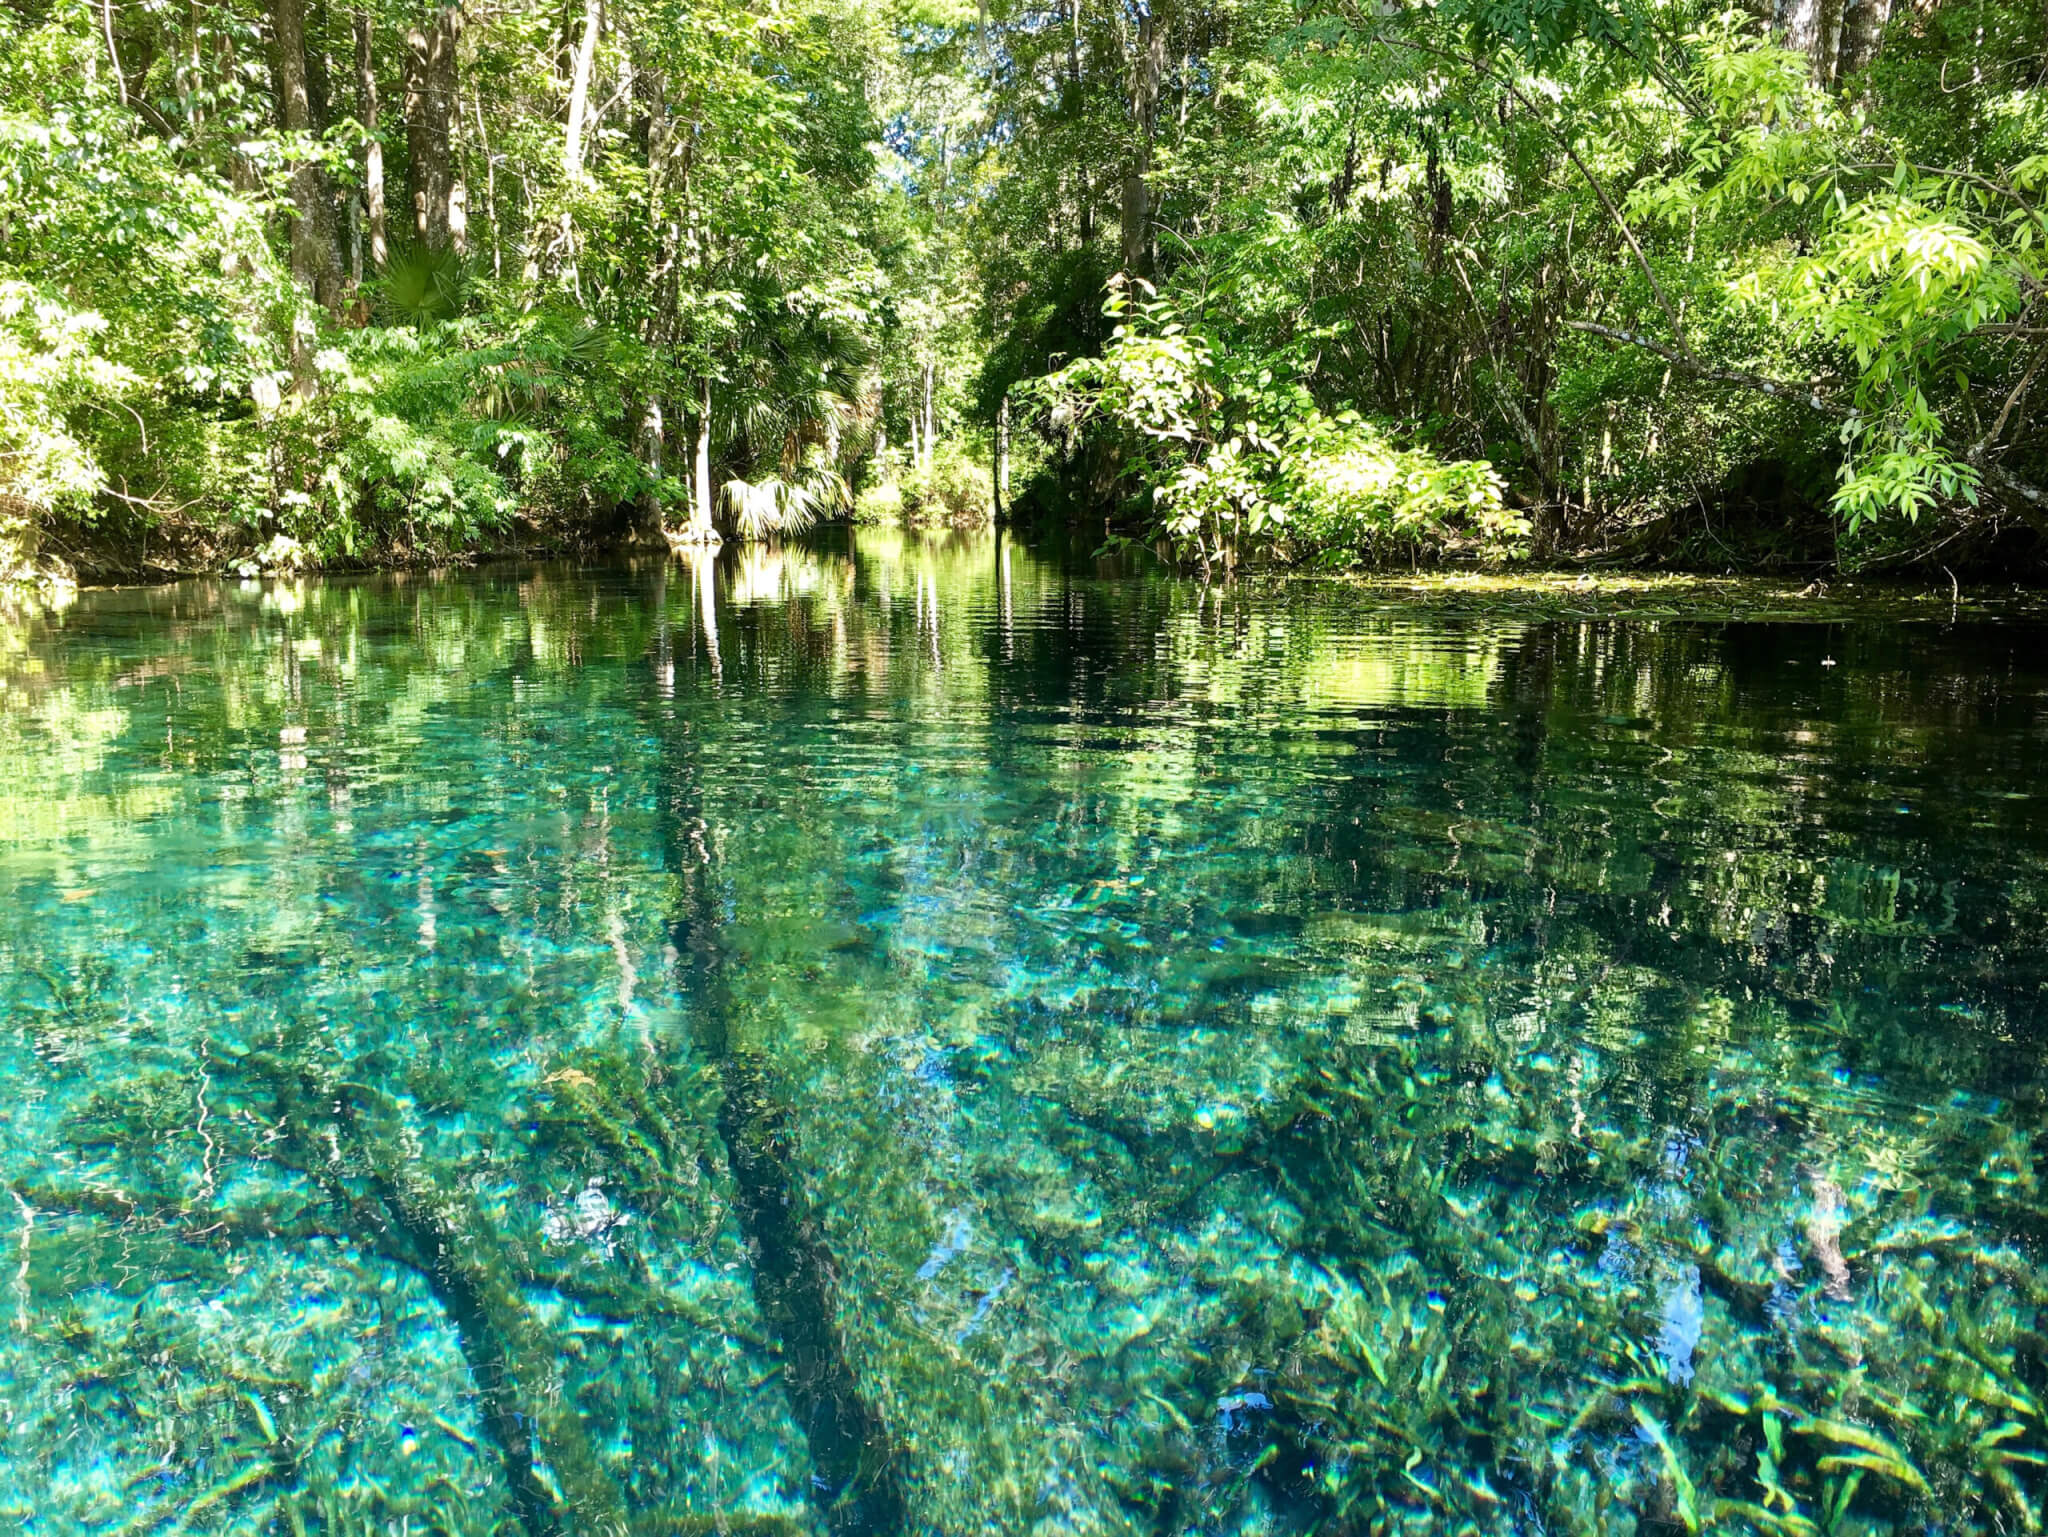 Florida, USA - July 31, 2018: America's largest spring sits untouched within Silver Springs State Park